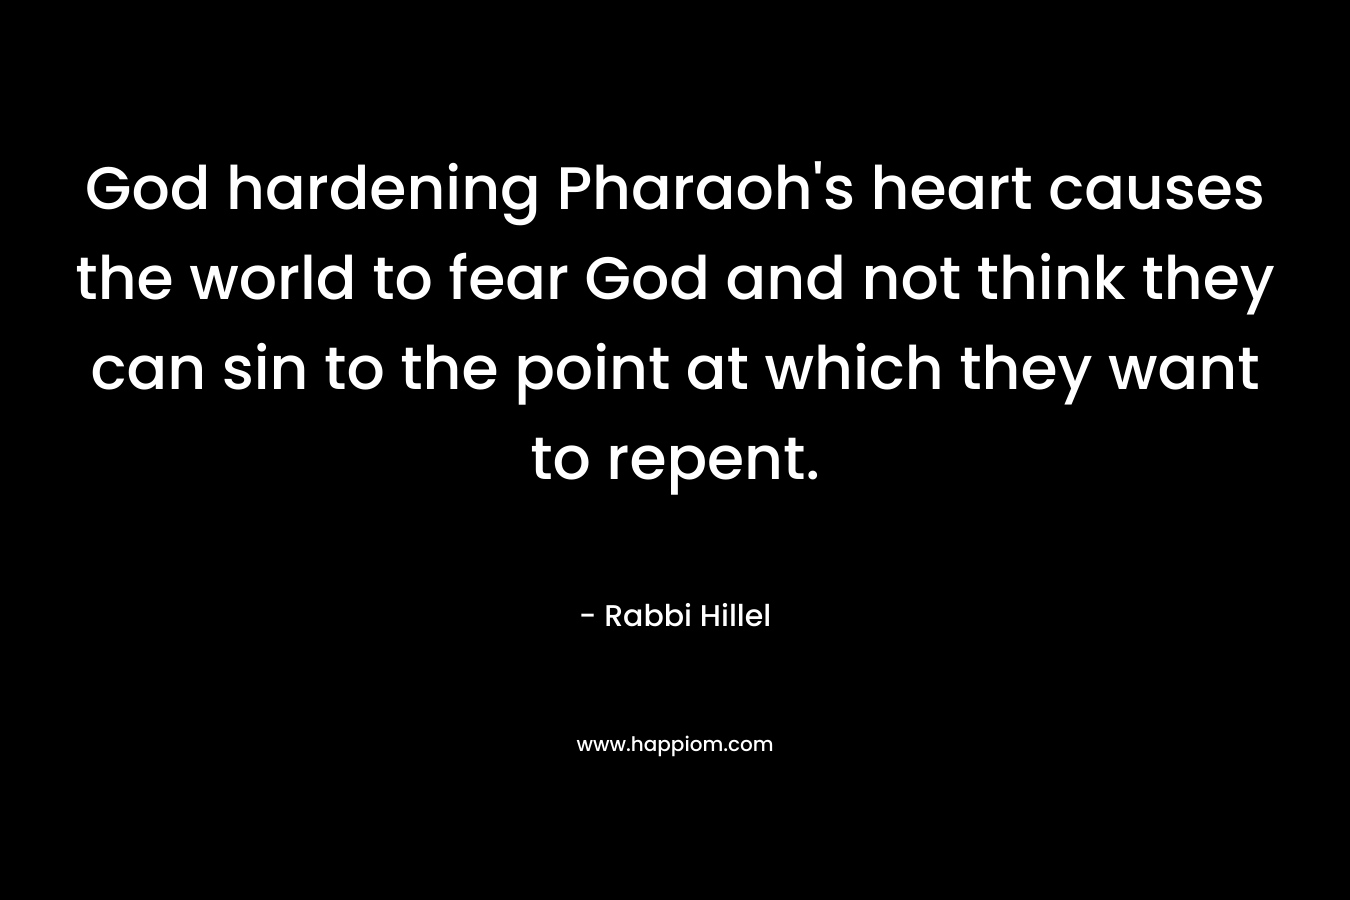 God hardening Pharaoh’s heart causes the world to fear God and not think they can sin to the point at which they want to repent. – Rabbi Hillel